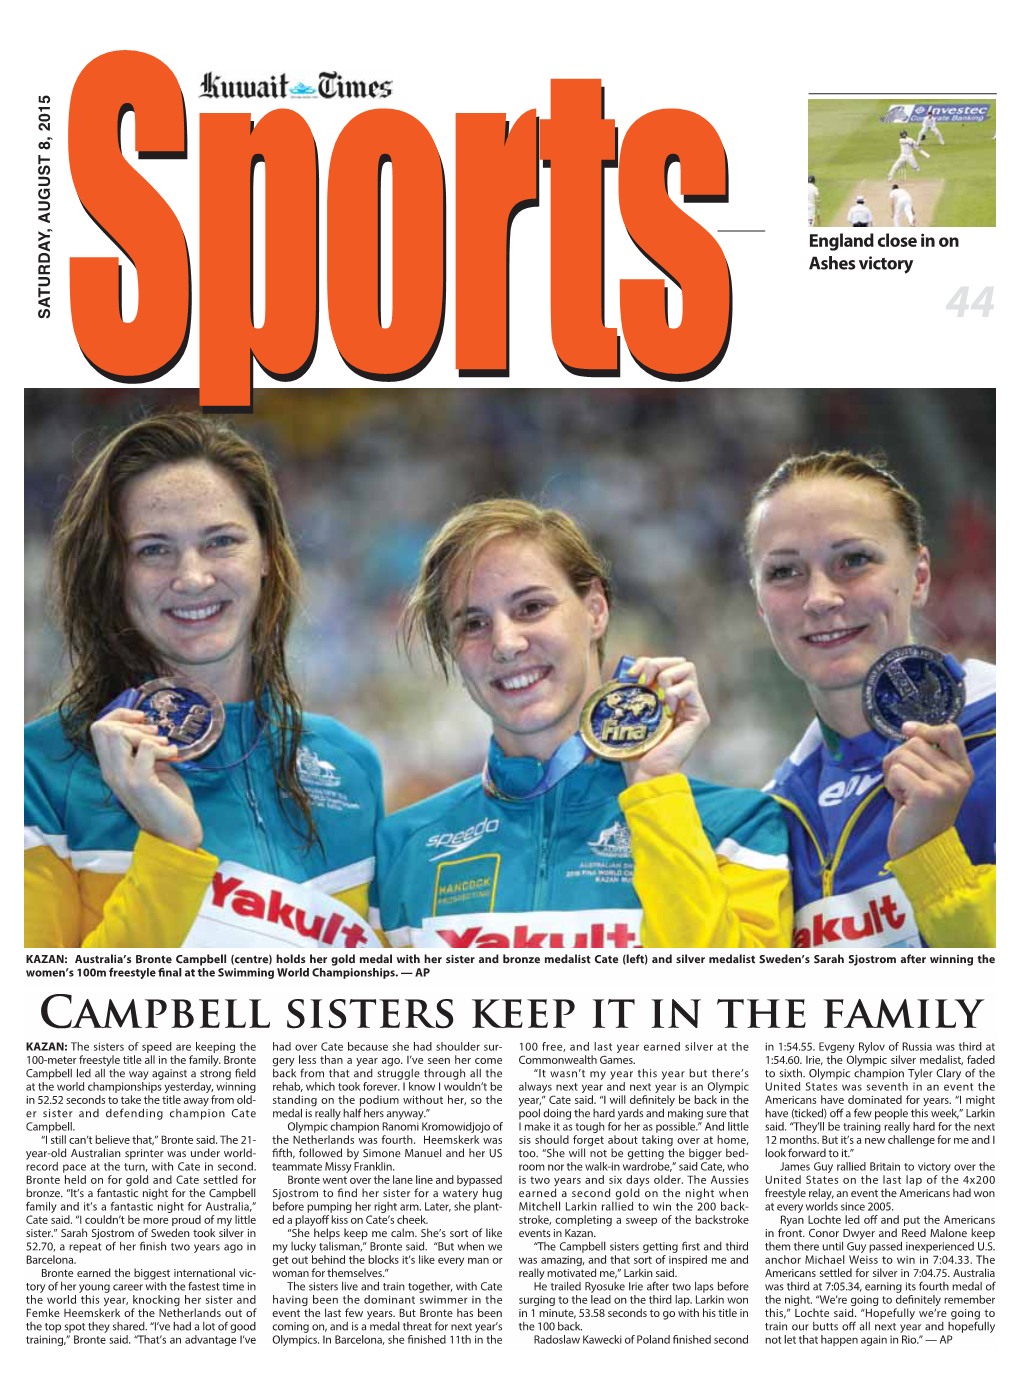 Campbell Sisters Keep It in the Family